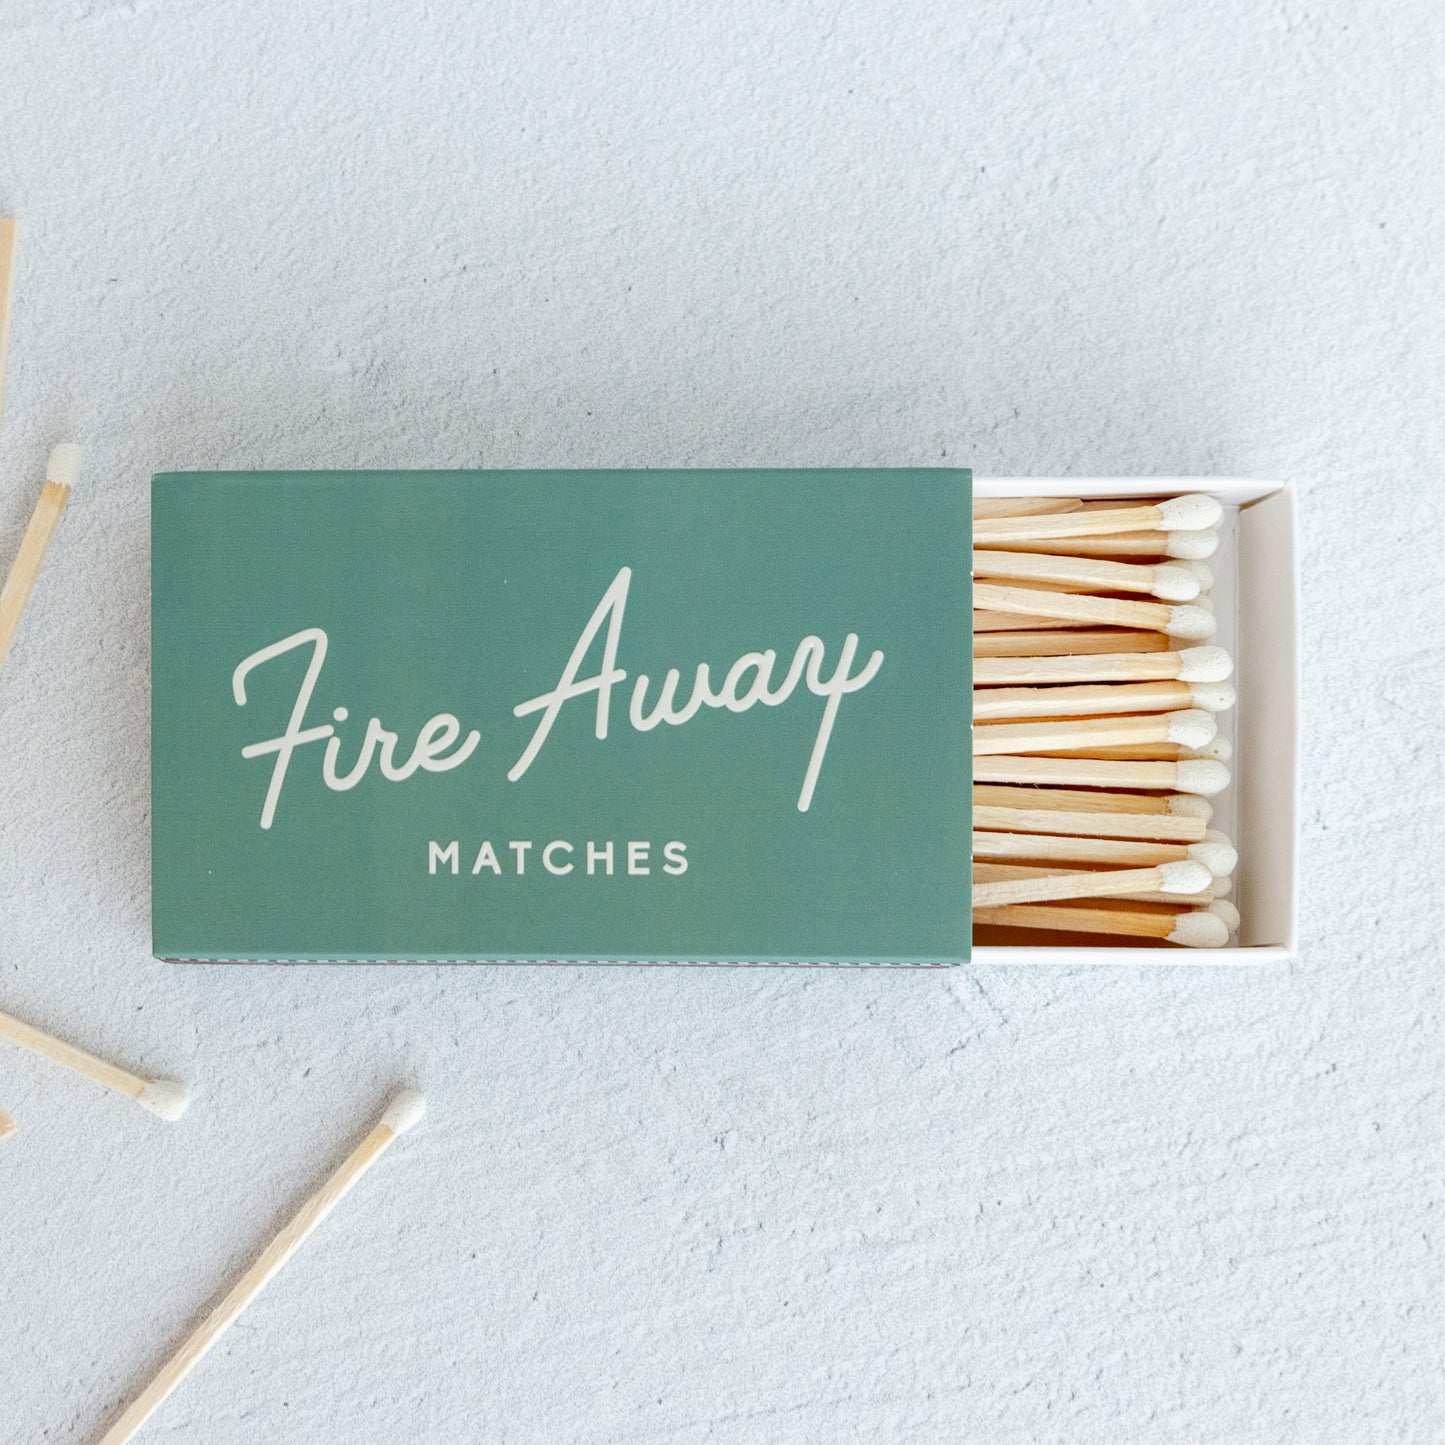 Vintage Safety Matches